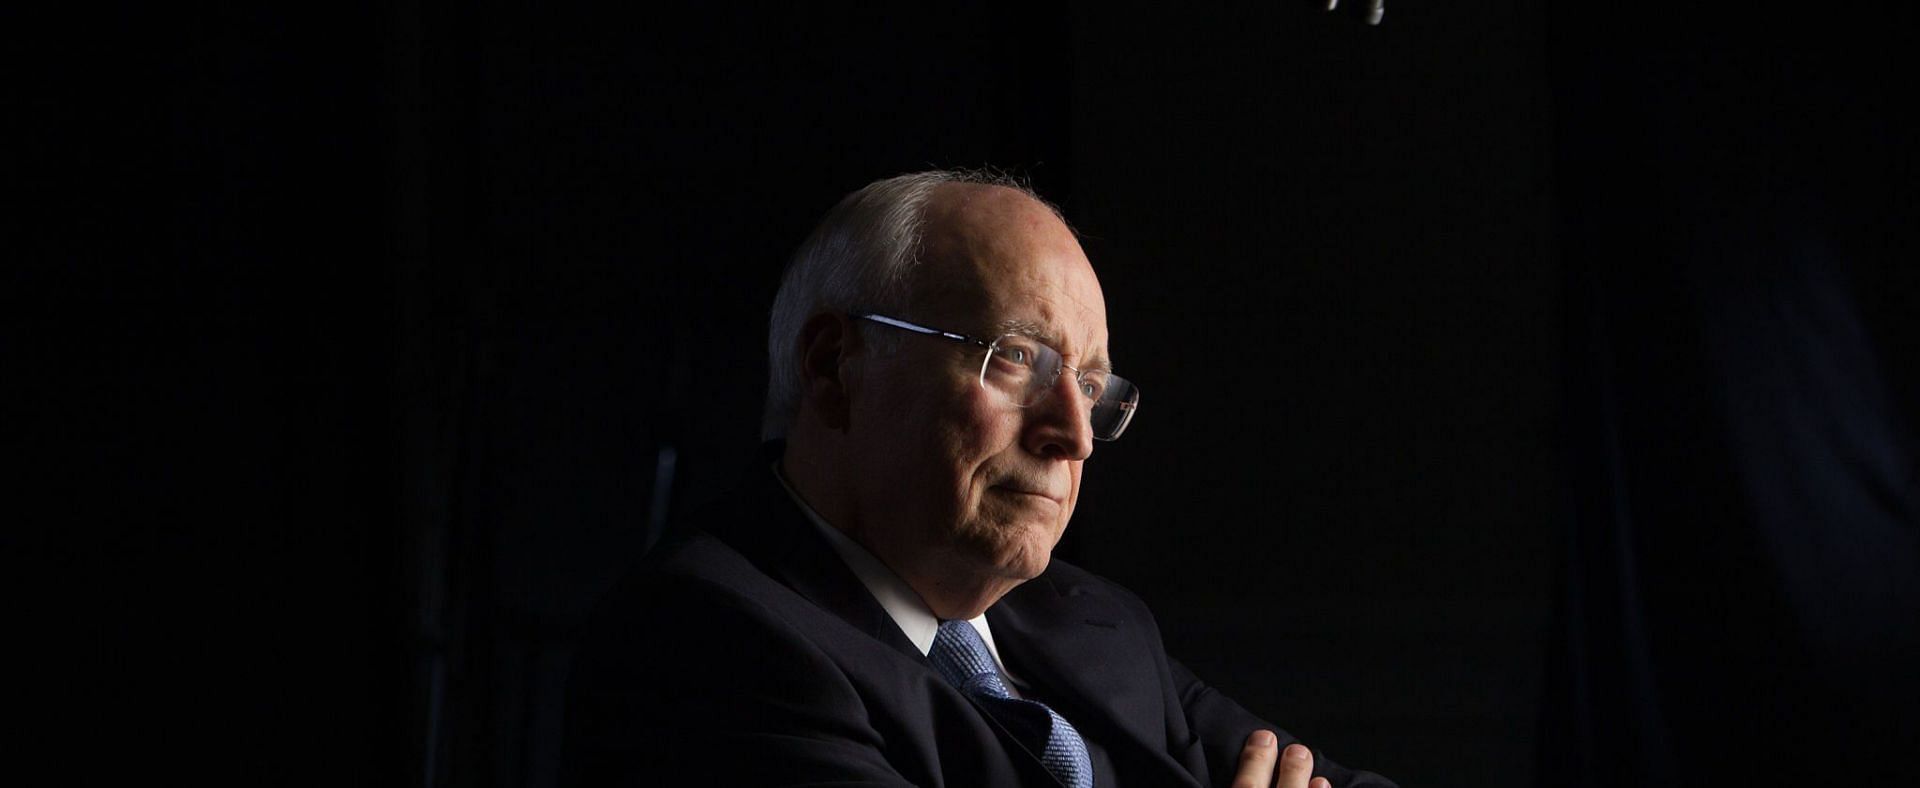 Dick Cheney has served as the 46th vice president of the United States between 2001 and 2009 (Image via David Hume Kennerly via GettyImages)